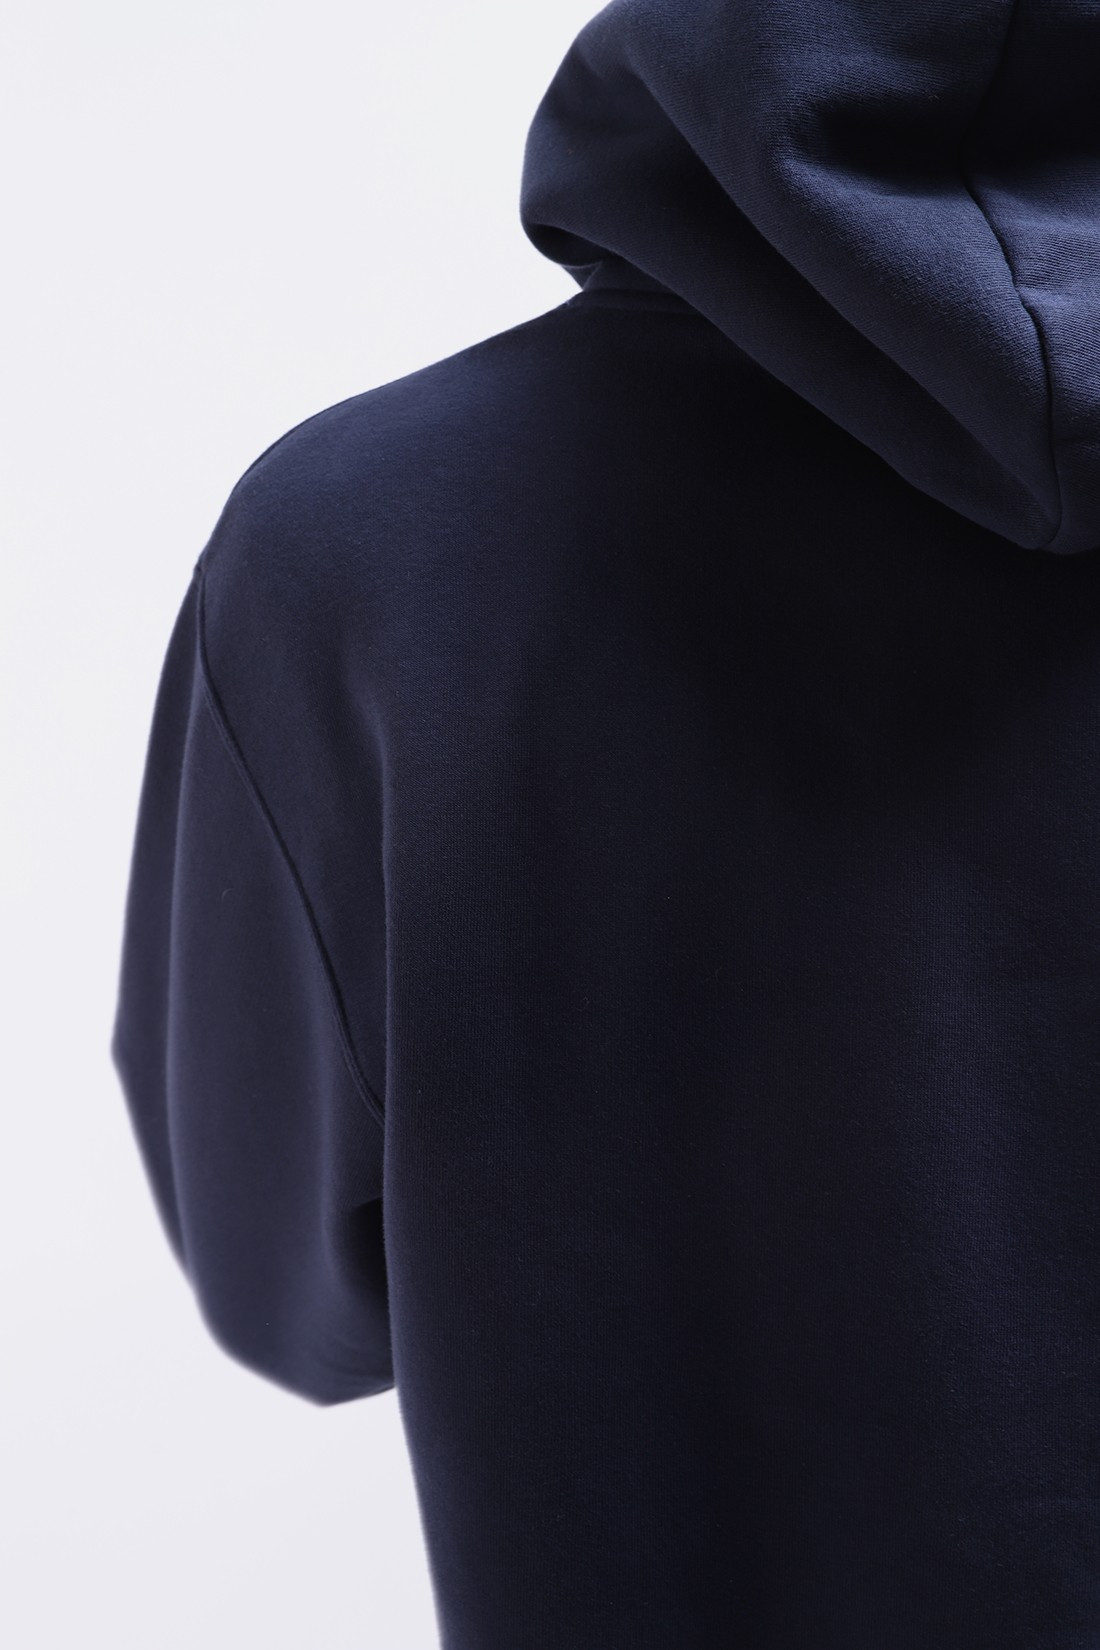 STAY HUNGRY SPORTS / Aborre hoodie Navy